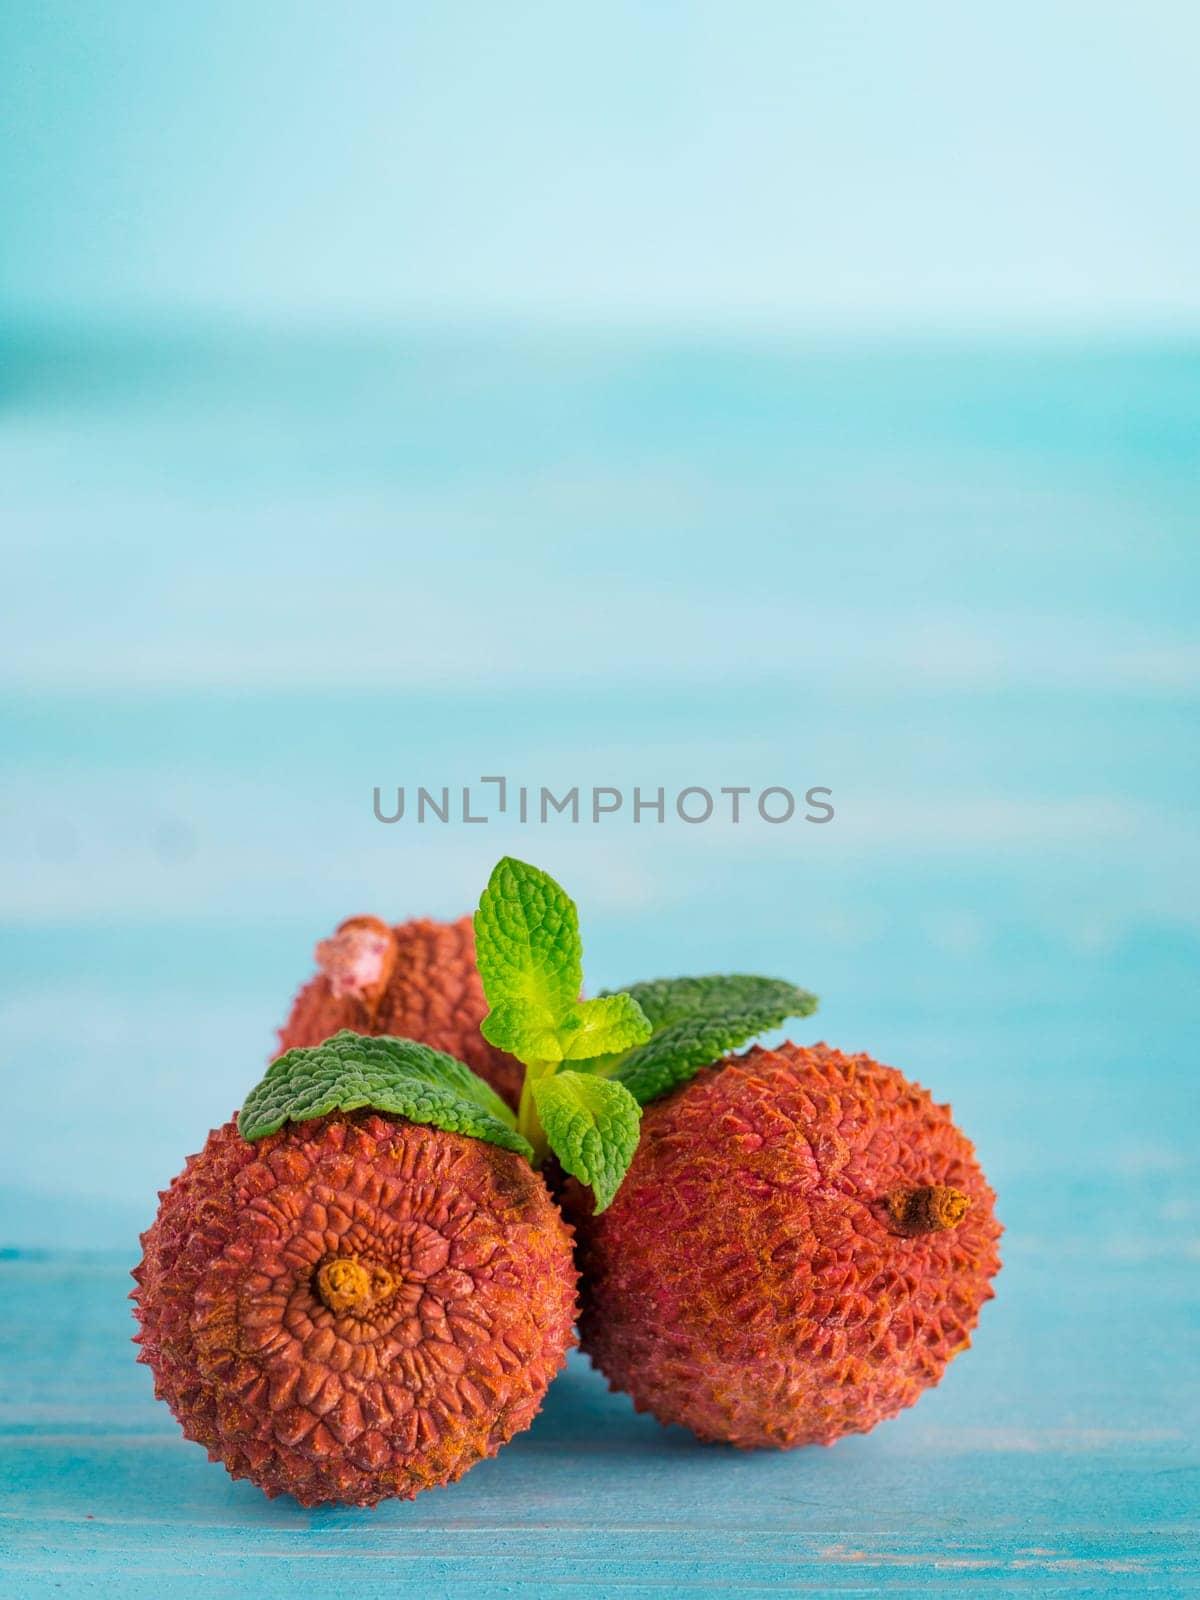 lichee fruit on turquoise wooden background close up